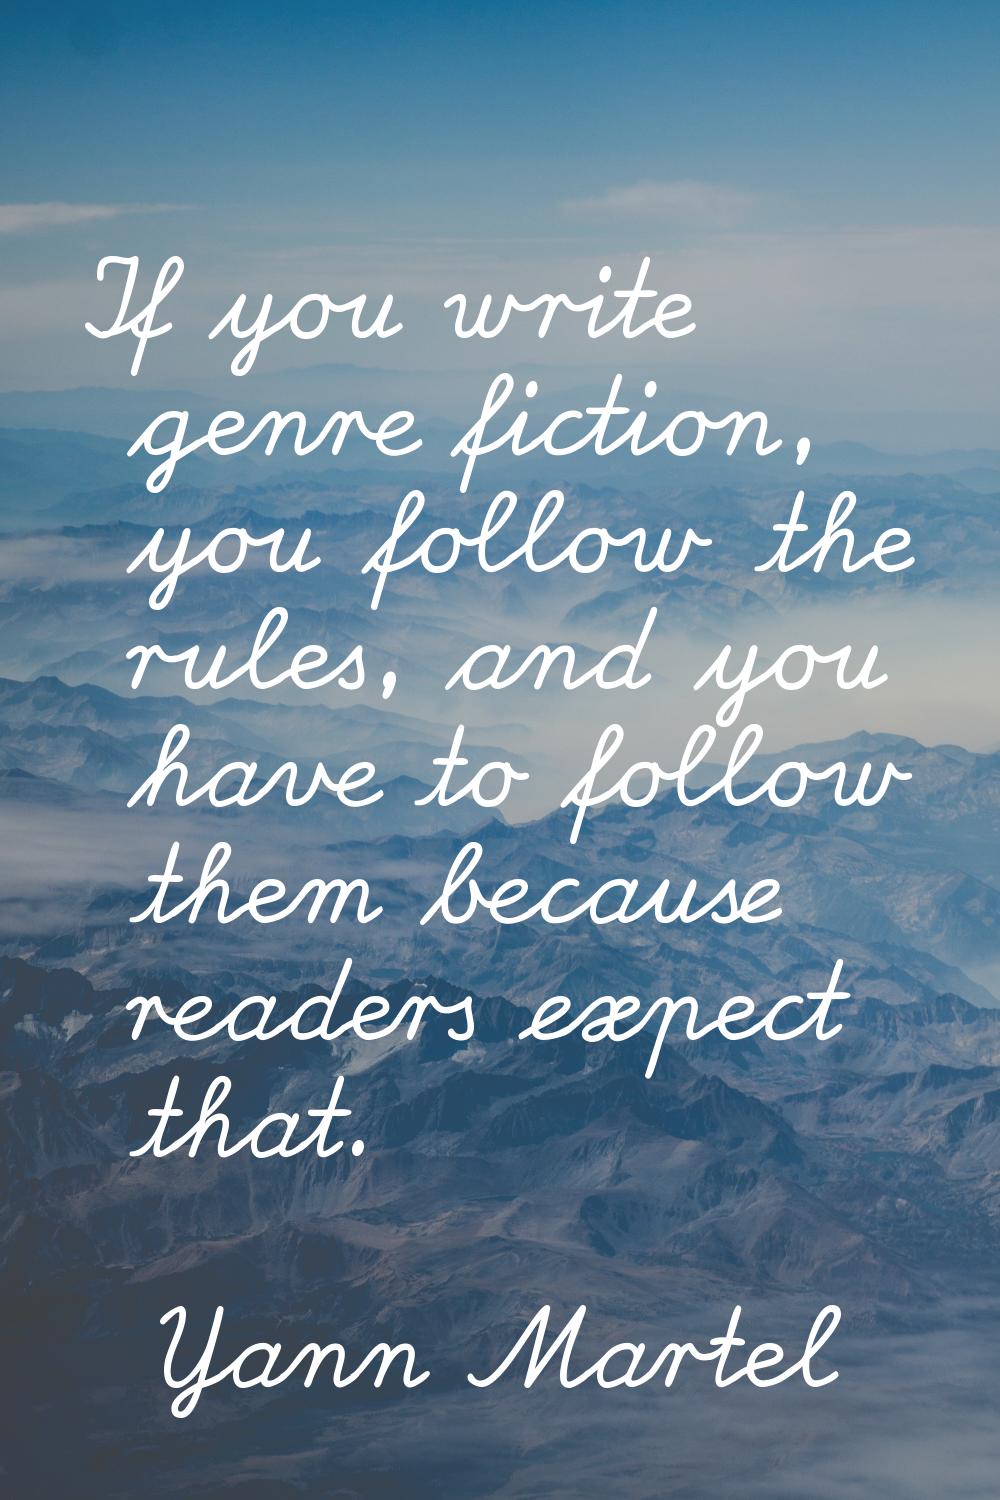 If you write genre fiction, you follow the rules, and you have to follow them because readers expec